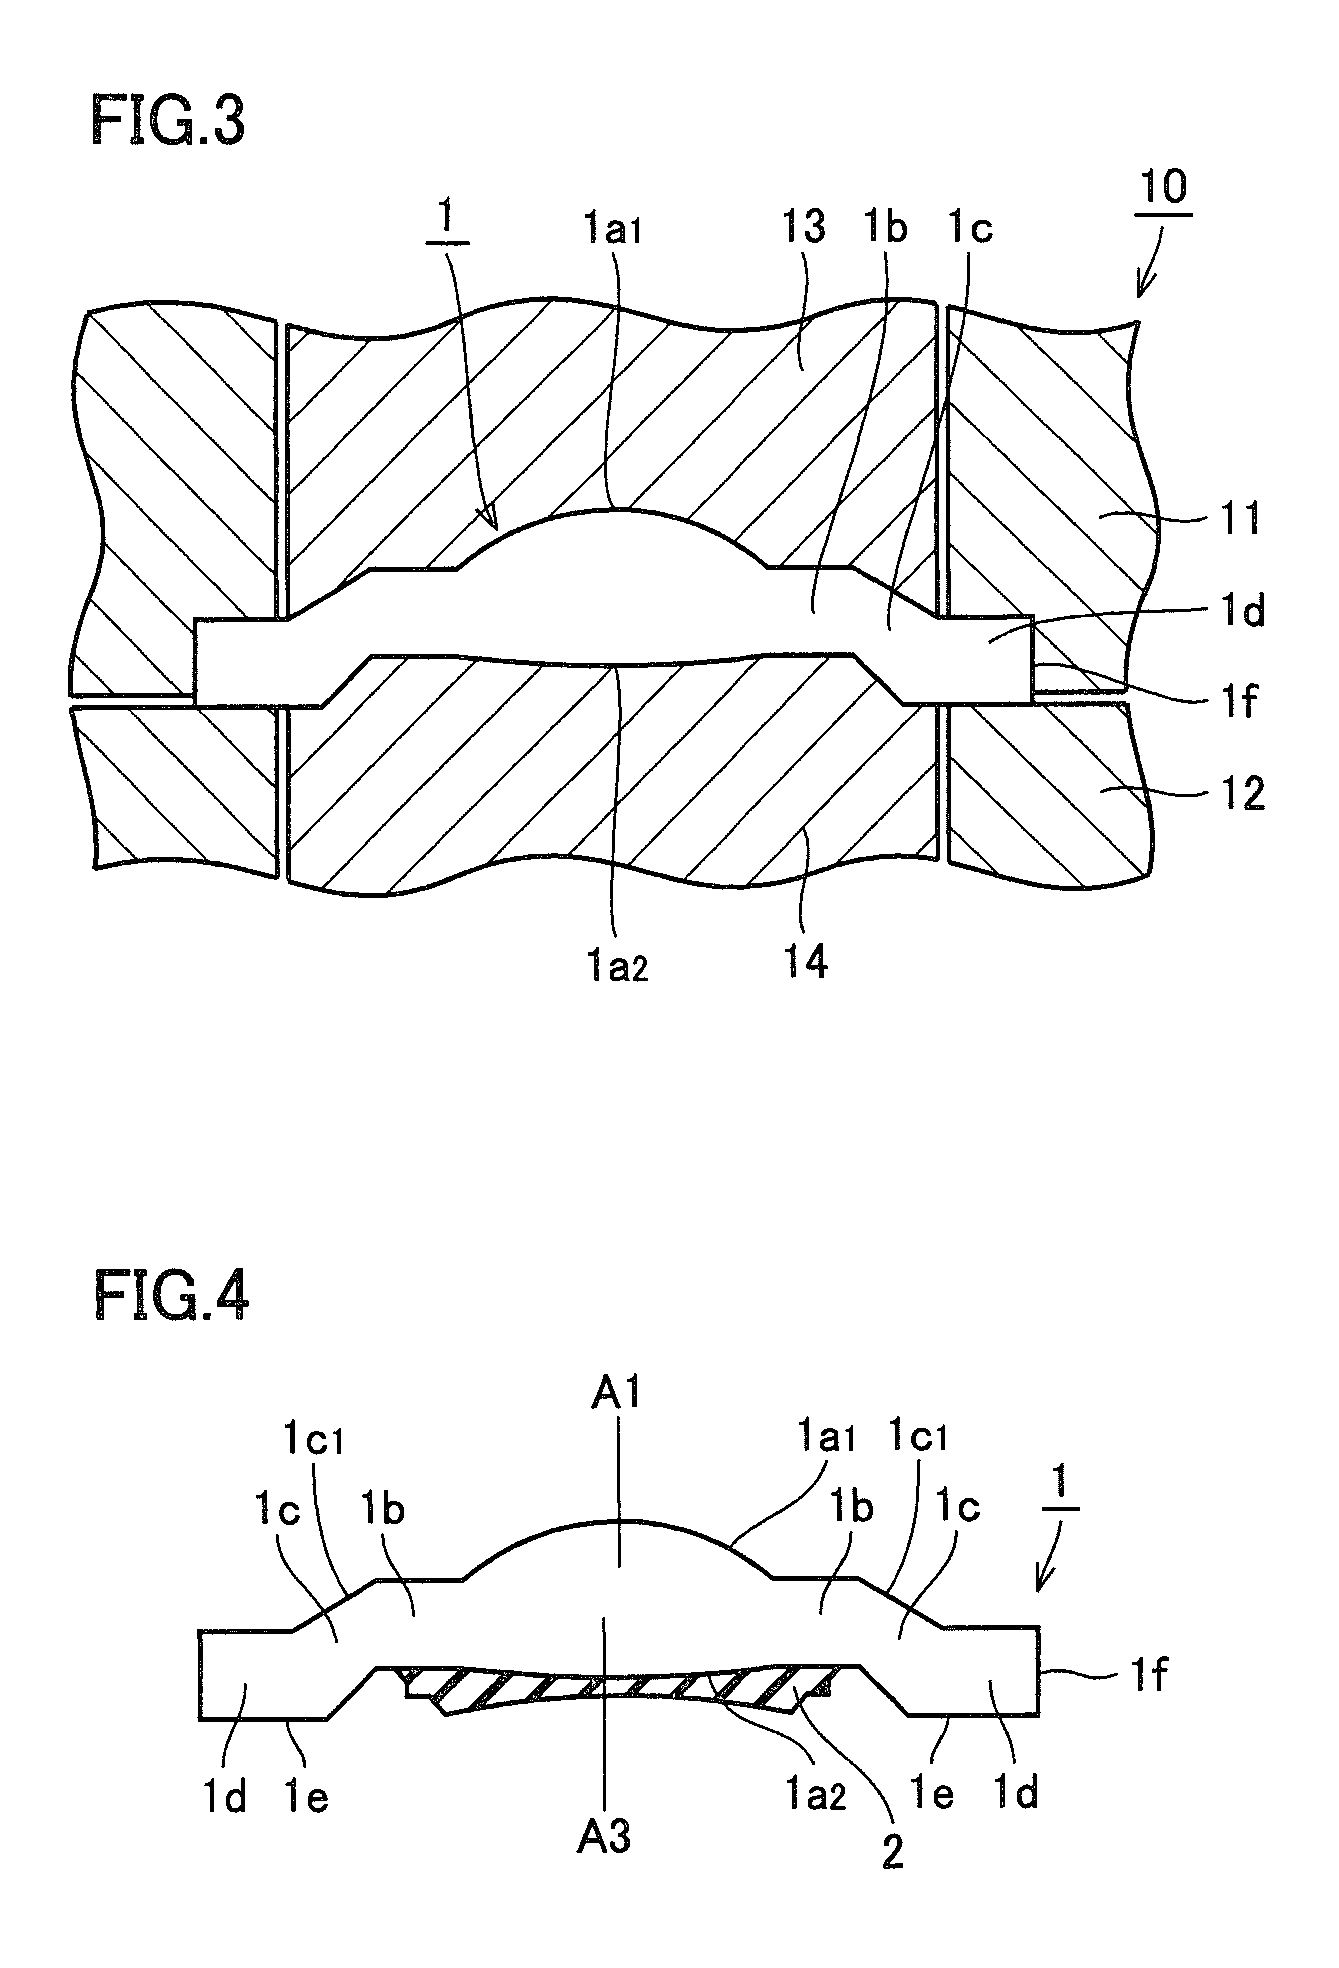 Optical lens, compound lens and method for producing the same, as well as cemented lens and method for producing the same